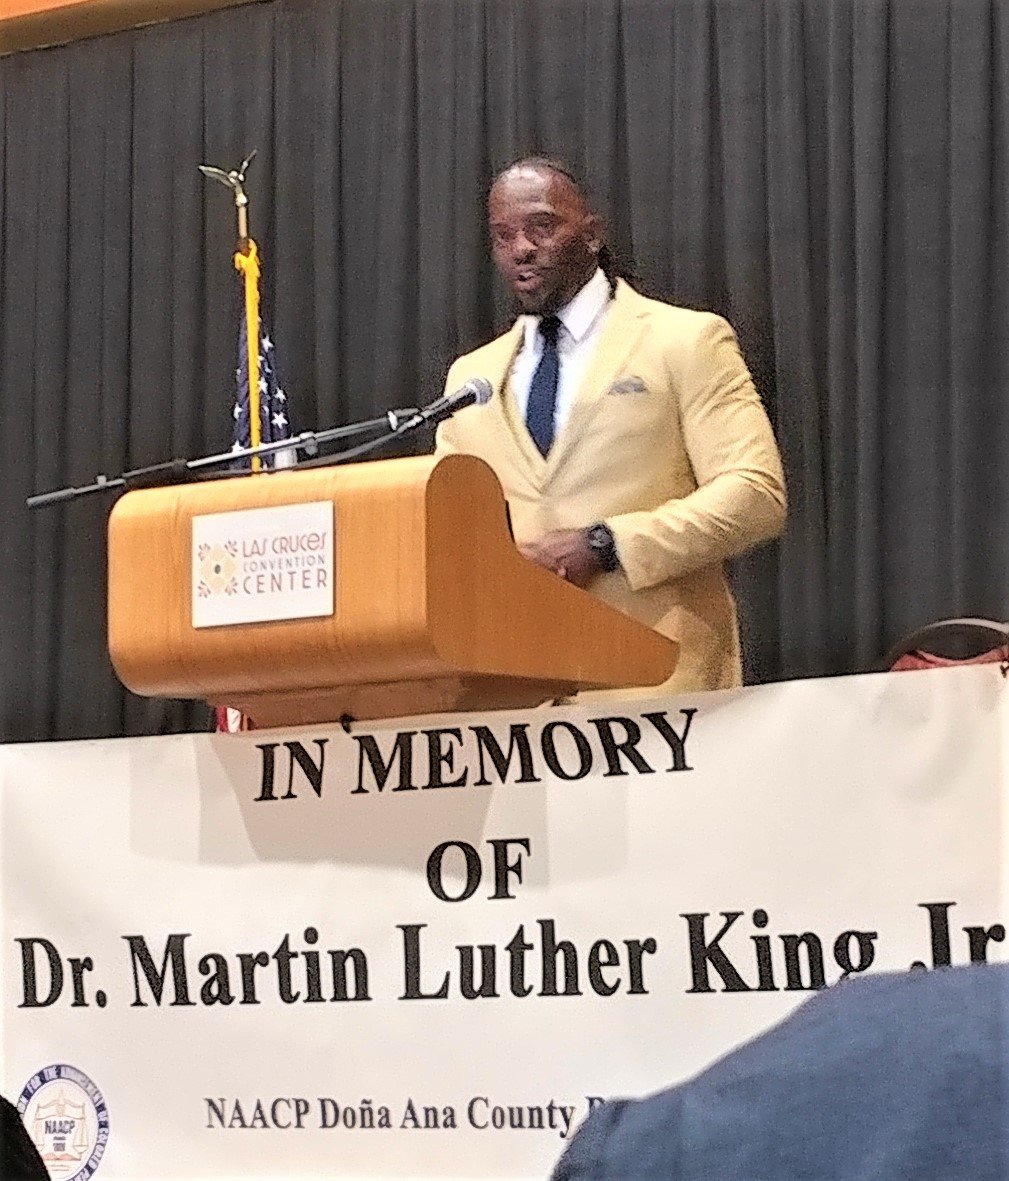 Doña Ana County Sheriff’s Department Sgt. Jamar Cotton was the keynote speaker at the Doña Ana County NAACP’s Jan. 16 Martin Luther King Jr. breakfast.